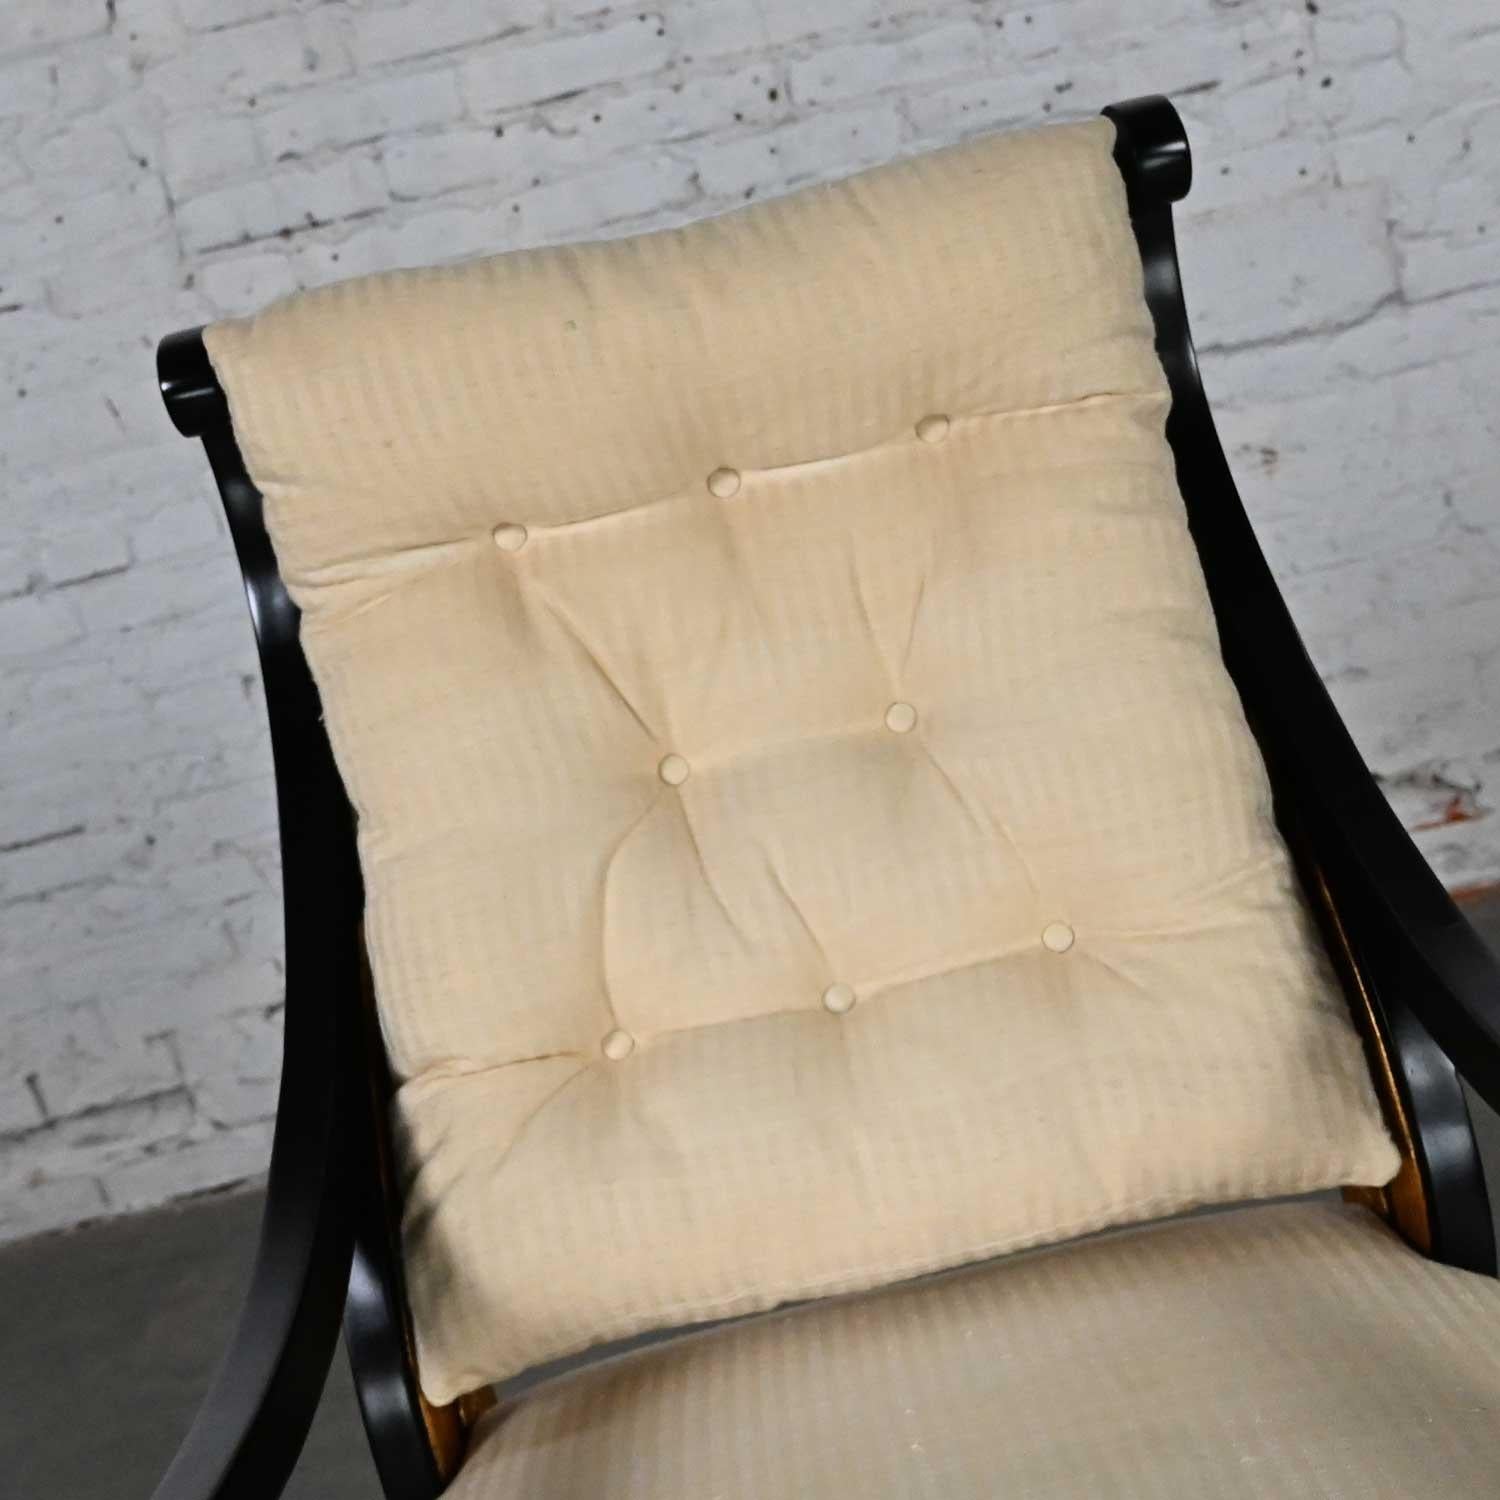 Late 20th Neoclassic Revival Black Side Chair Gilt Wing Accents Off-White Fabric For Sale 6